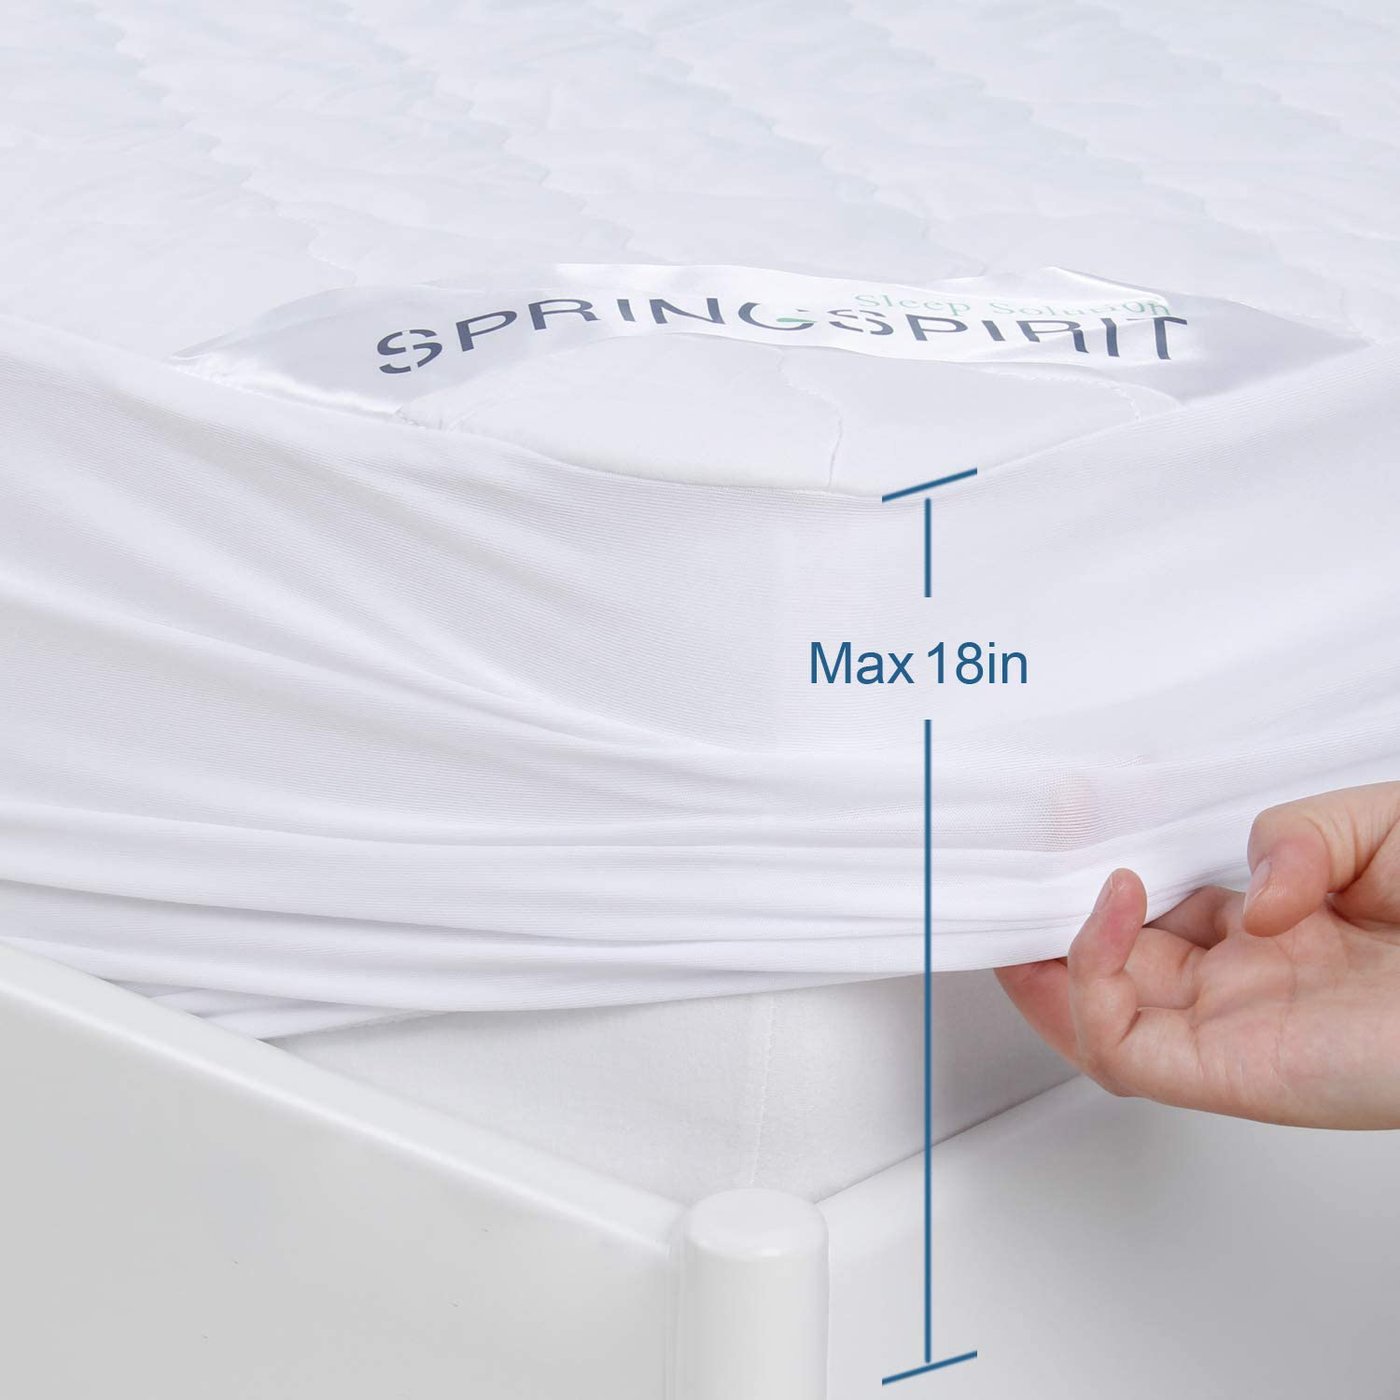 SPRINGSPIRIT Mattress Protector Waterproof Full XL Size, Breathable & Machine Washable Full XL Mattress Pad Cover Quilted Fitted with Deep Pocket up to 14" Depth